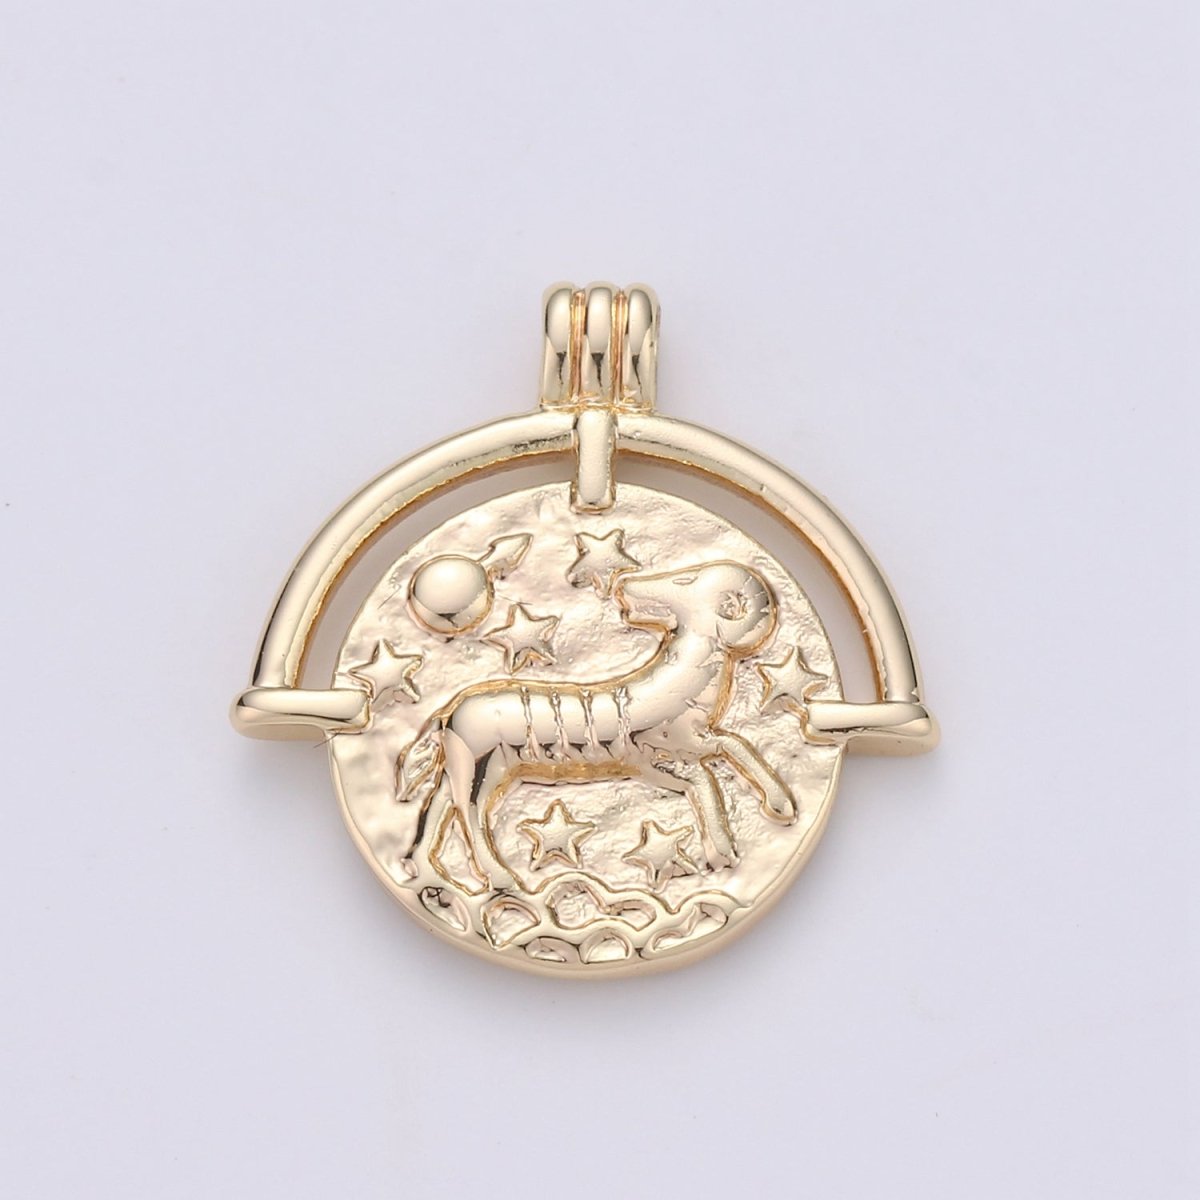 Double Sided 14K Gold Filled Zodiac Horoscope Sign Constellation Medallion Pendant Charm Celestial Astrology Charm Necklace Jewelry Making - DLUXCA